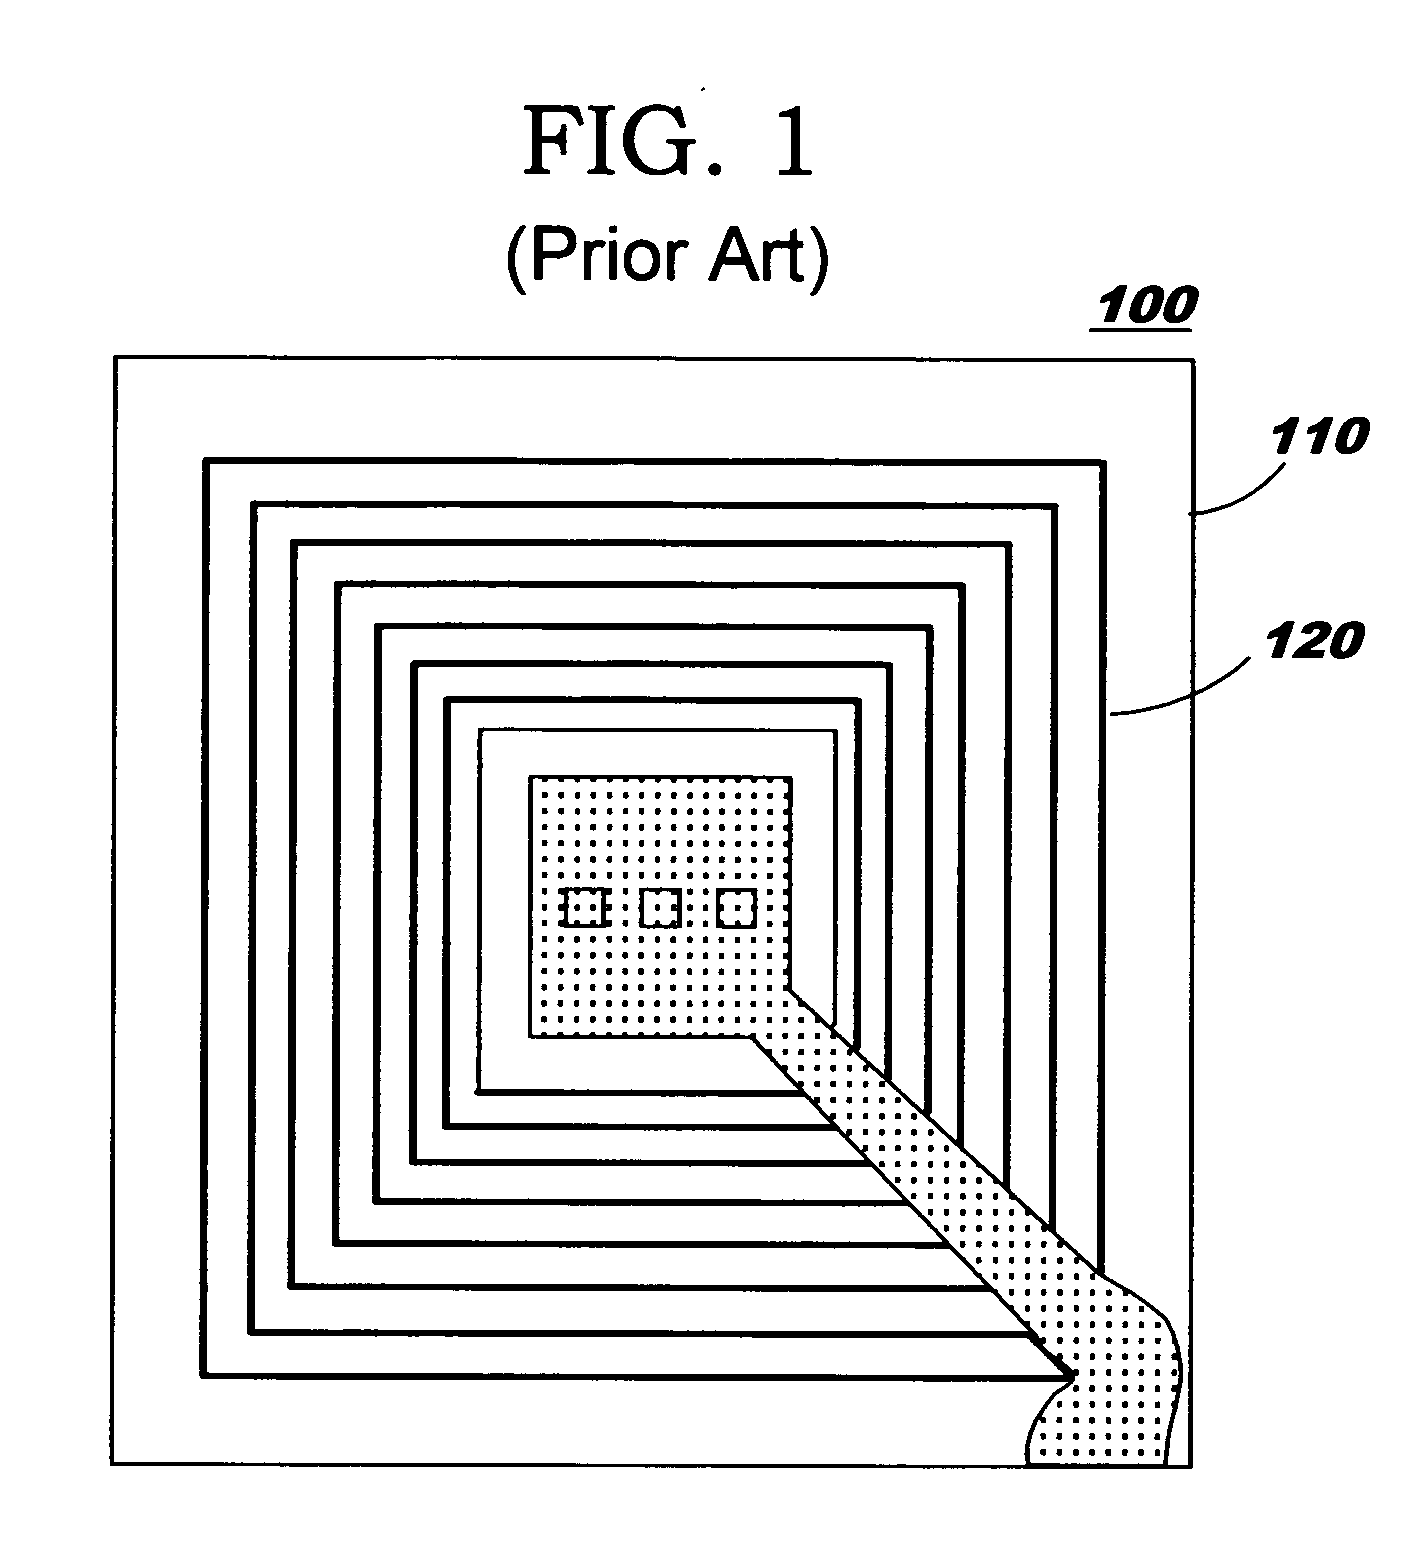 Detecting wear through use of information-transmitting devices